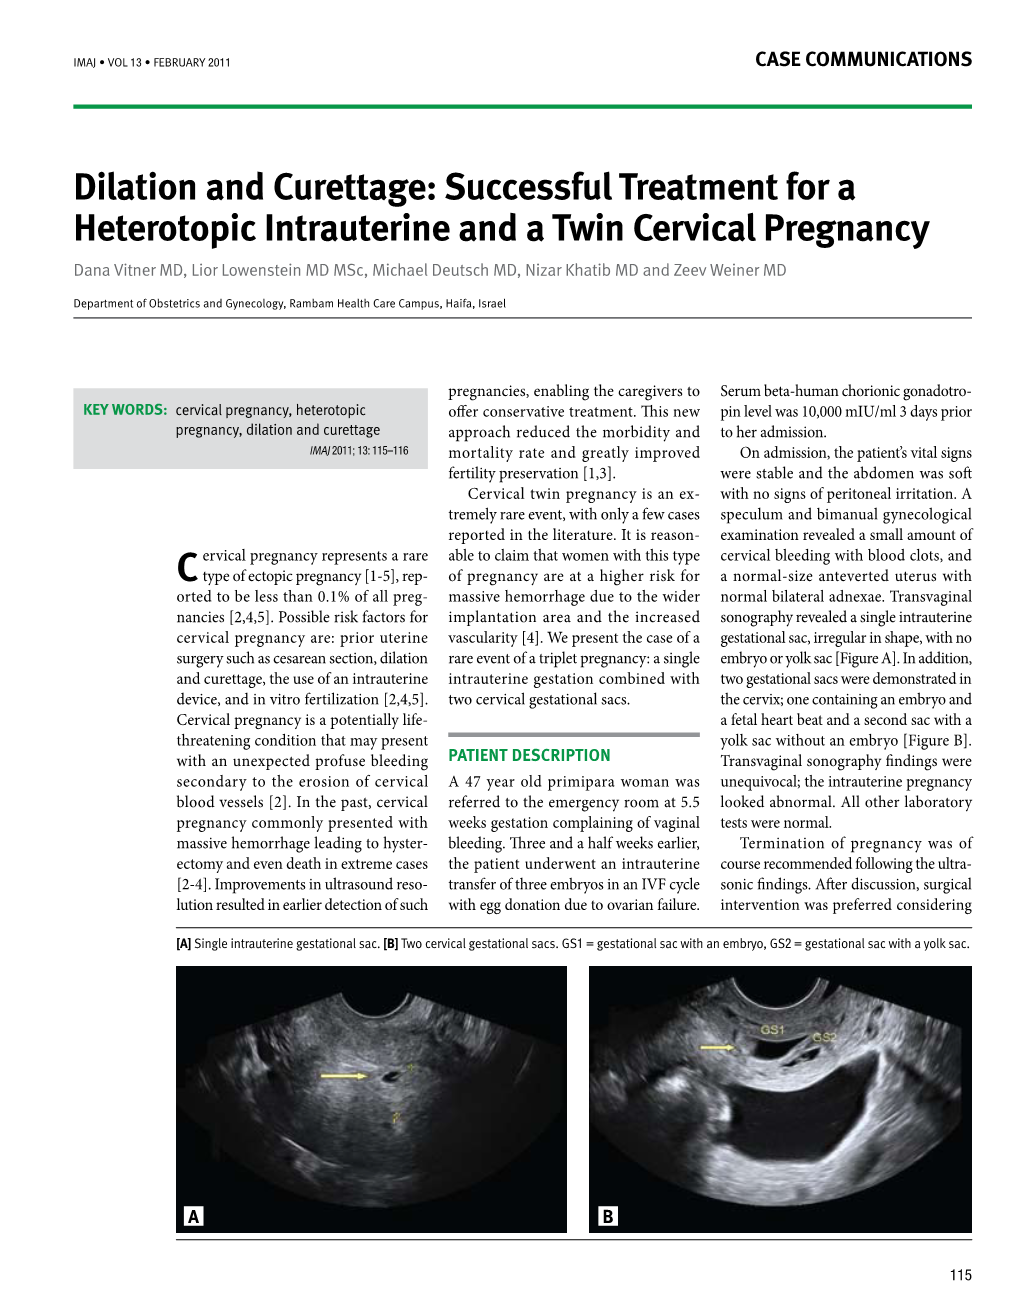 Successful Treatment for a Heterotopic Intrauterine and a Twin Cervical